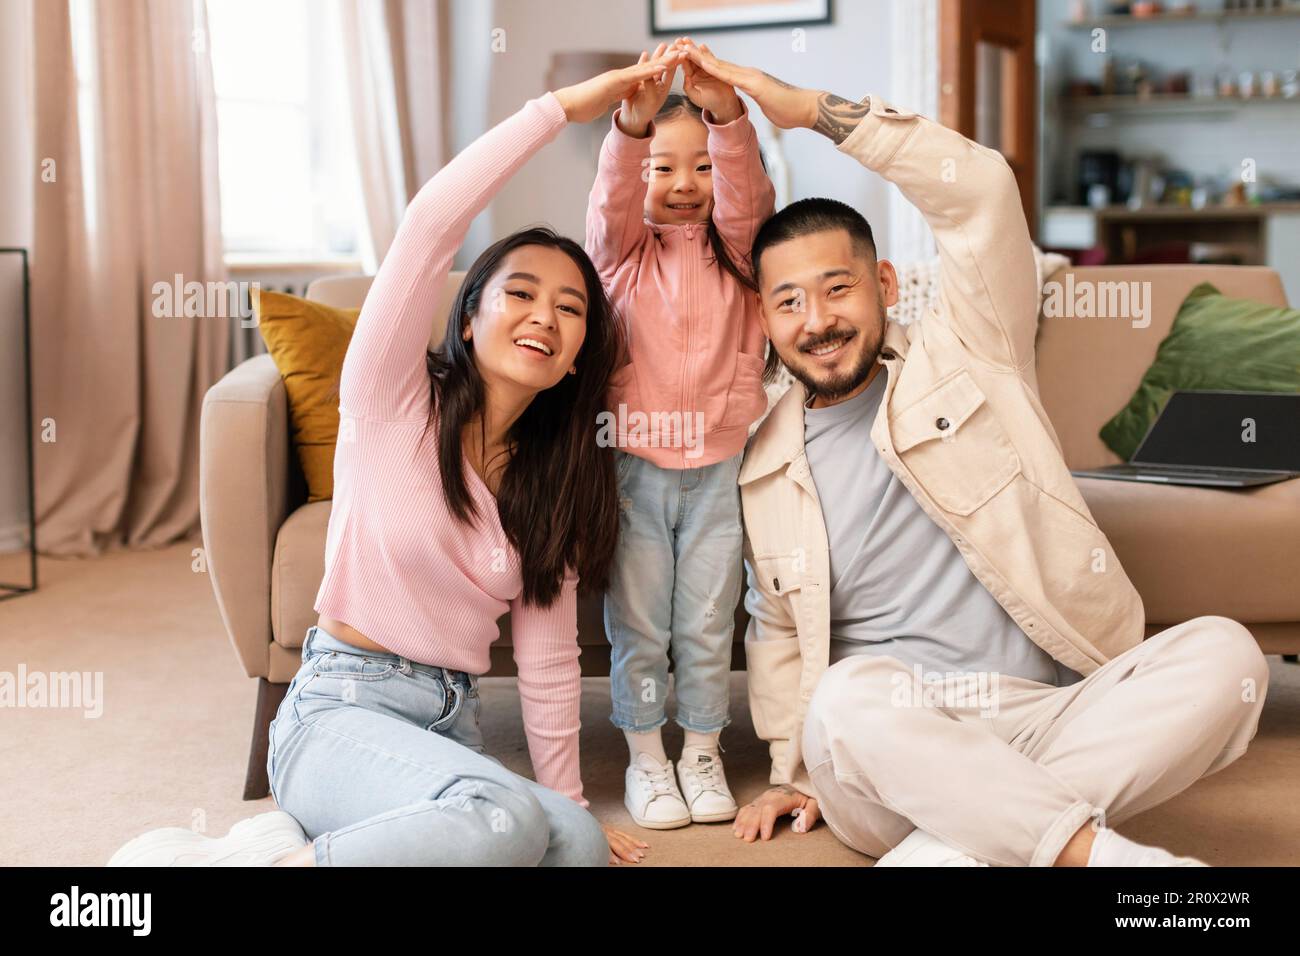 Asian Family With Child Celebrating Homeownership Doing Roof Gesture Indoors Stock Photo